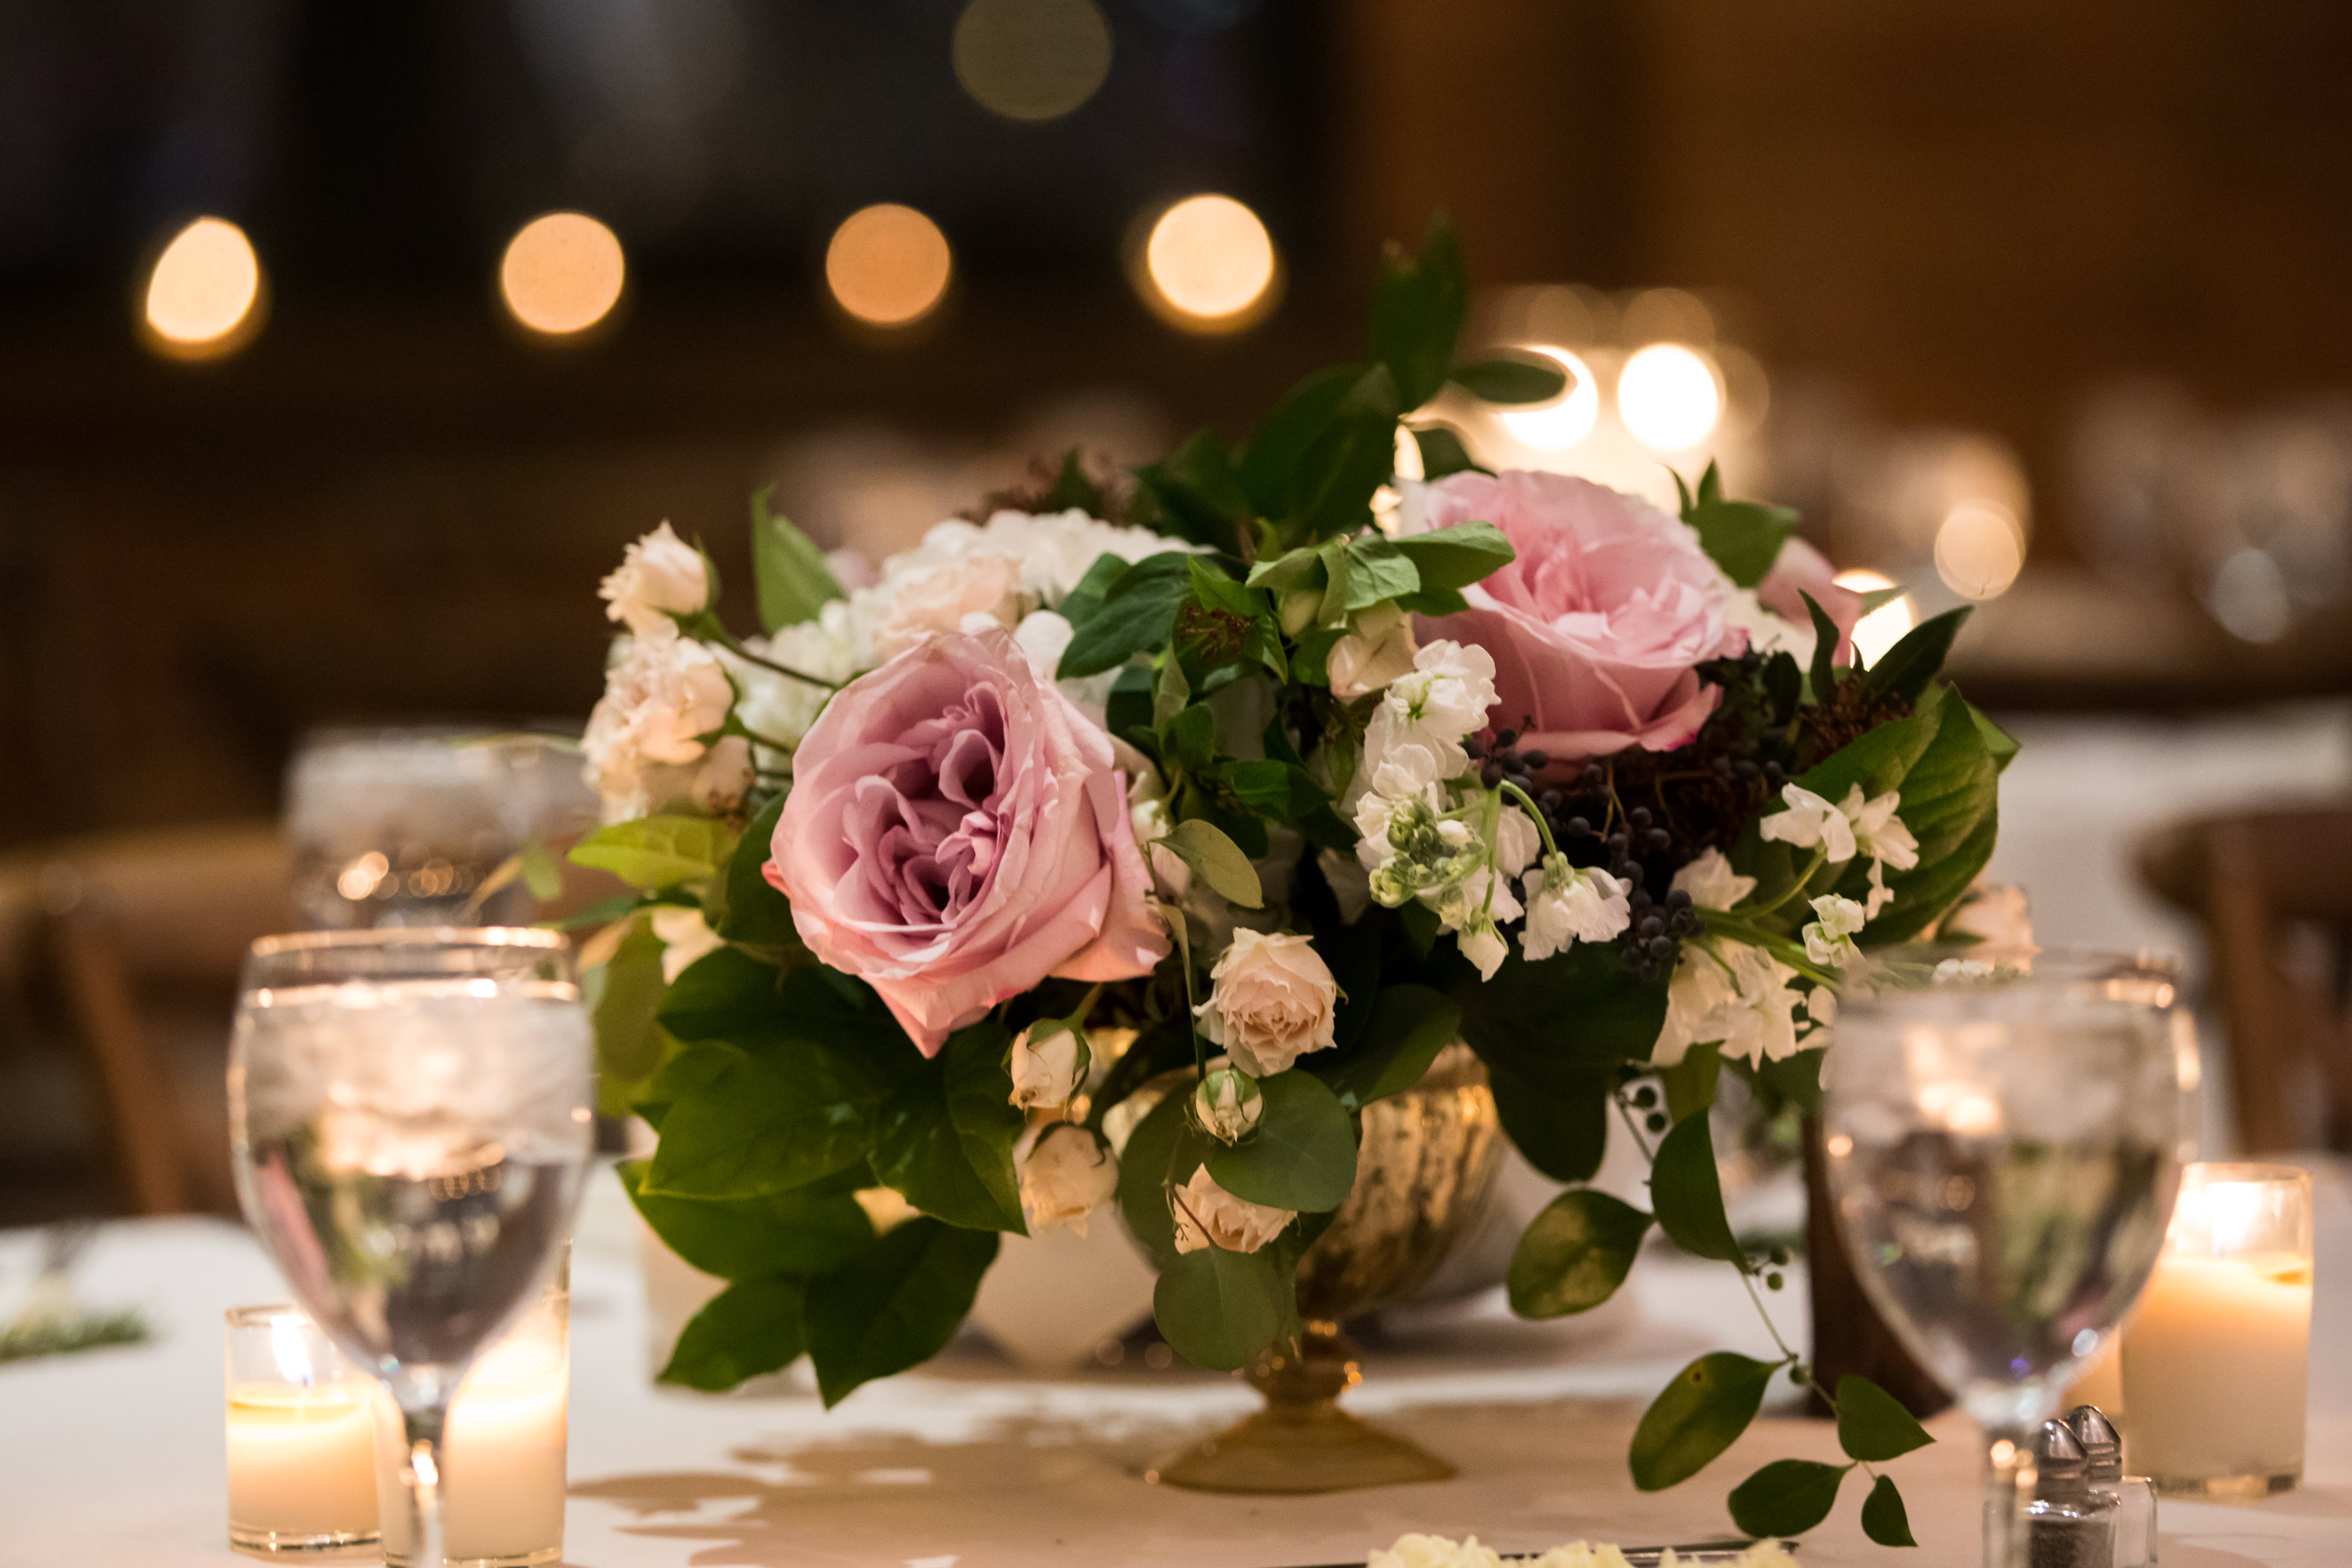 Winter wedding floral arrangment with garden roses, blush spray roses, and white hydrangea in gold vase.